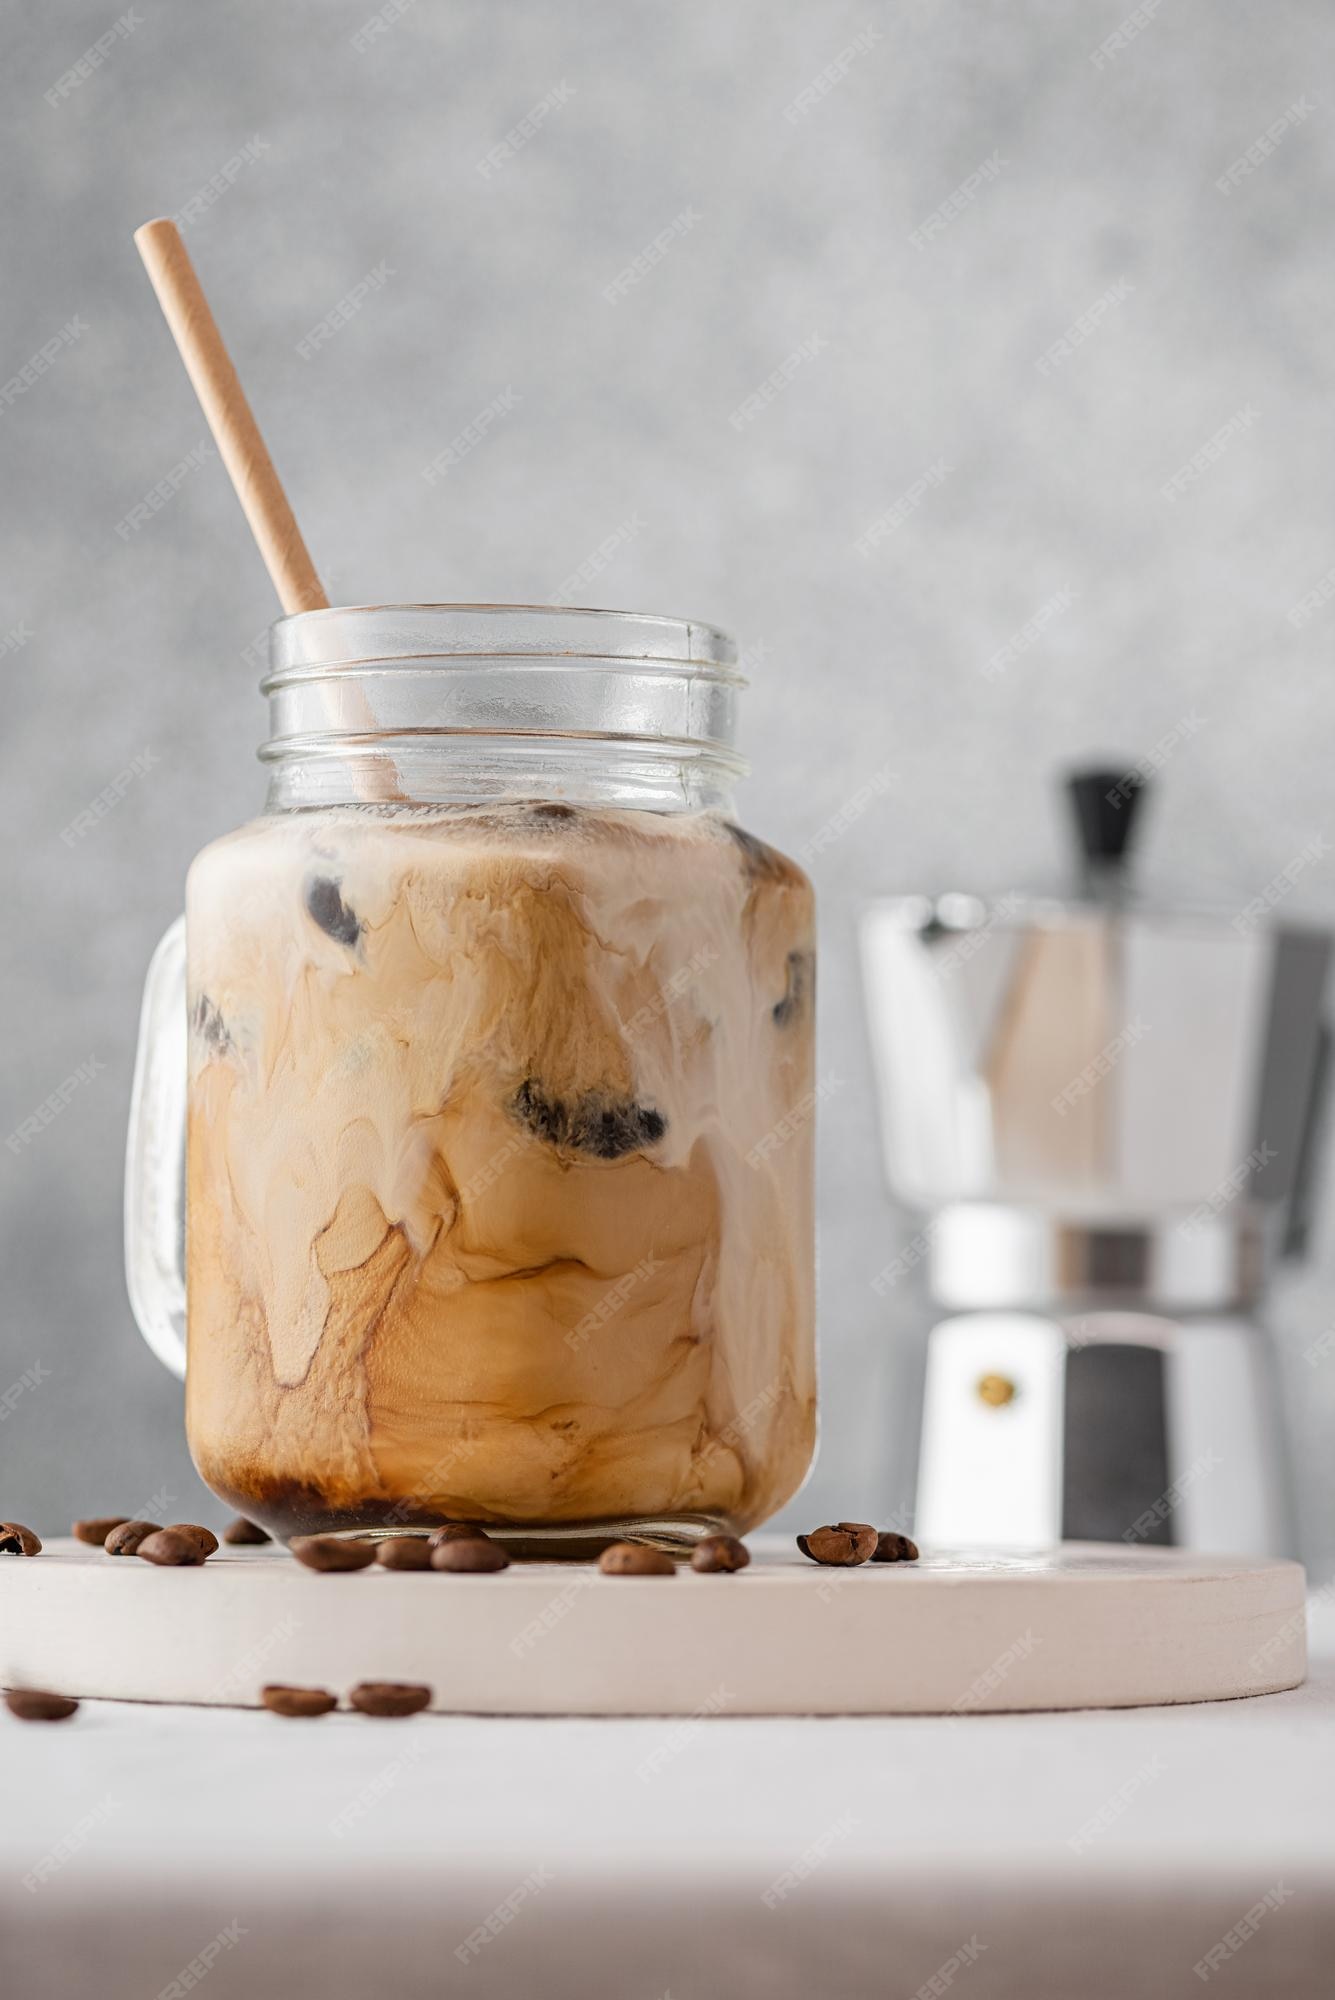 Premium Photo  Iced coffee with milk or cream in a glass jar with a straw  on gray background cold refreshment summer drink